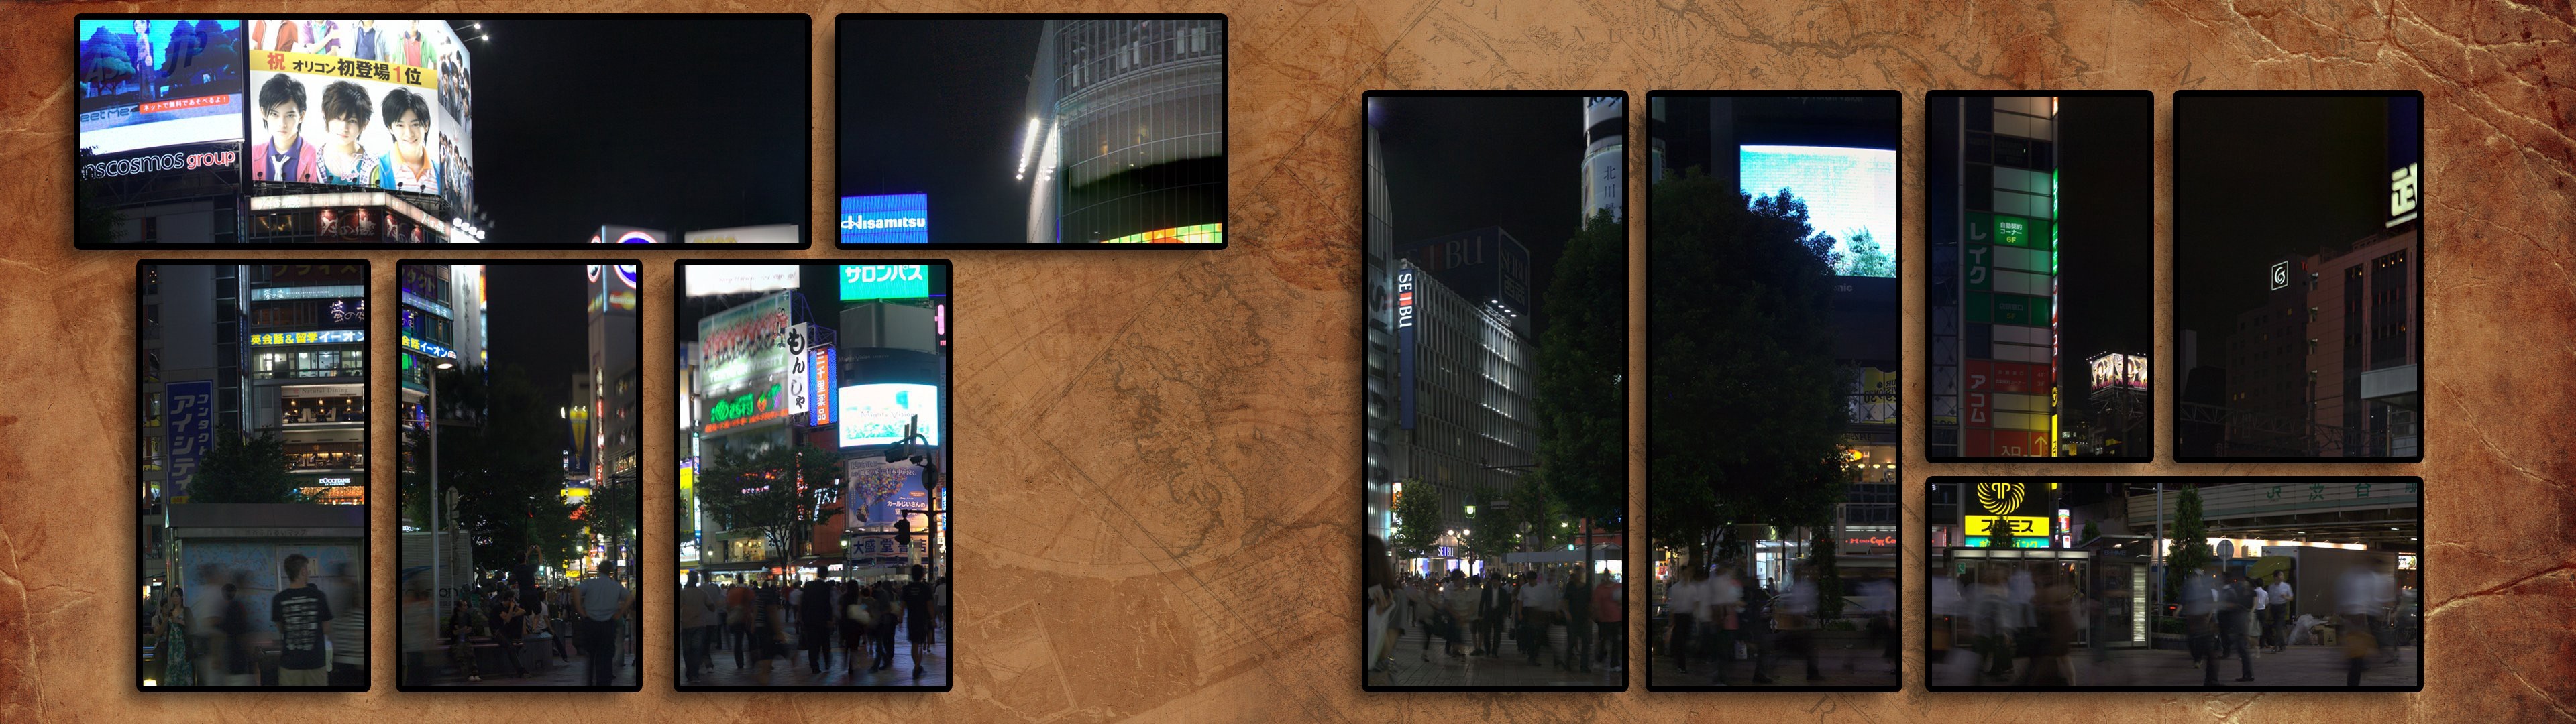 General 3840x1080 Japan collage night cityscape